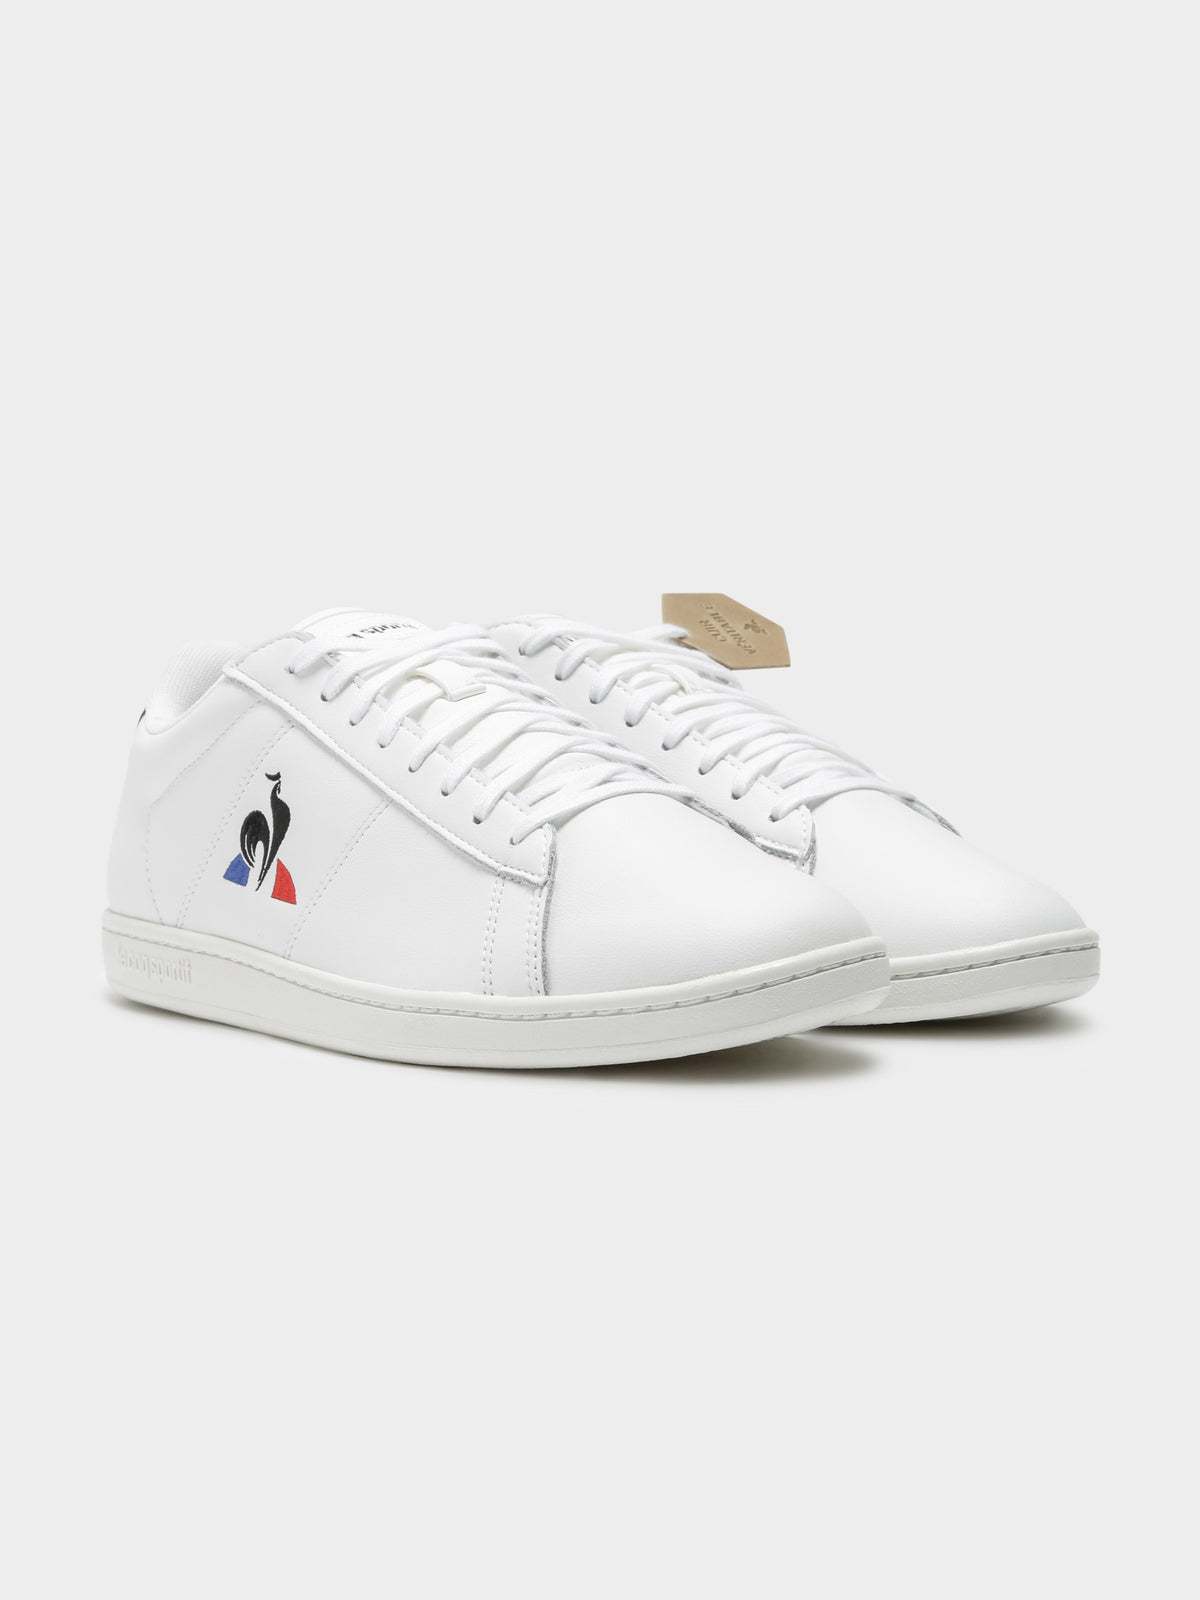 Mens Courtset Sneakers in Optical White &amp; Dress Blue